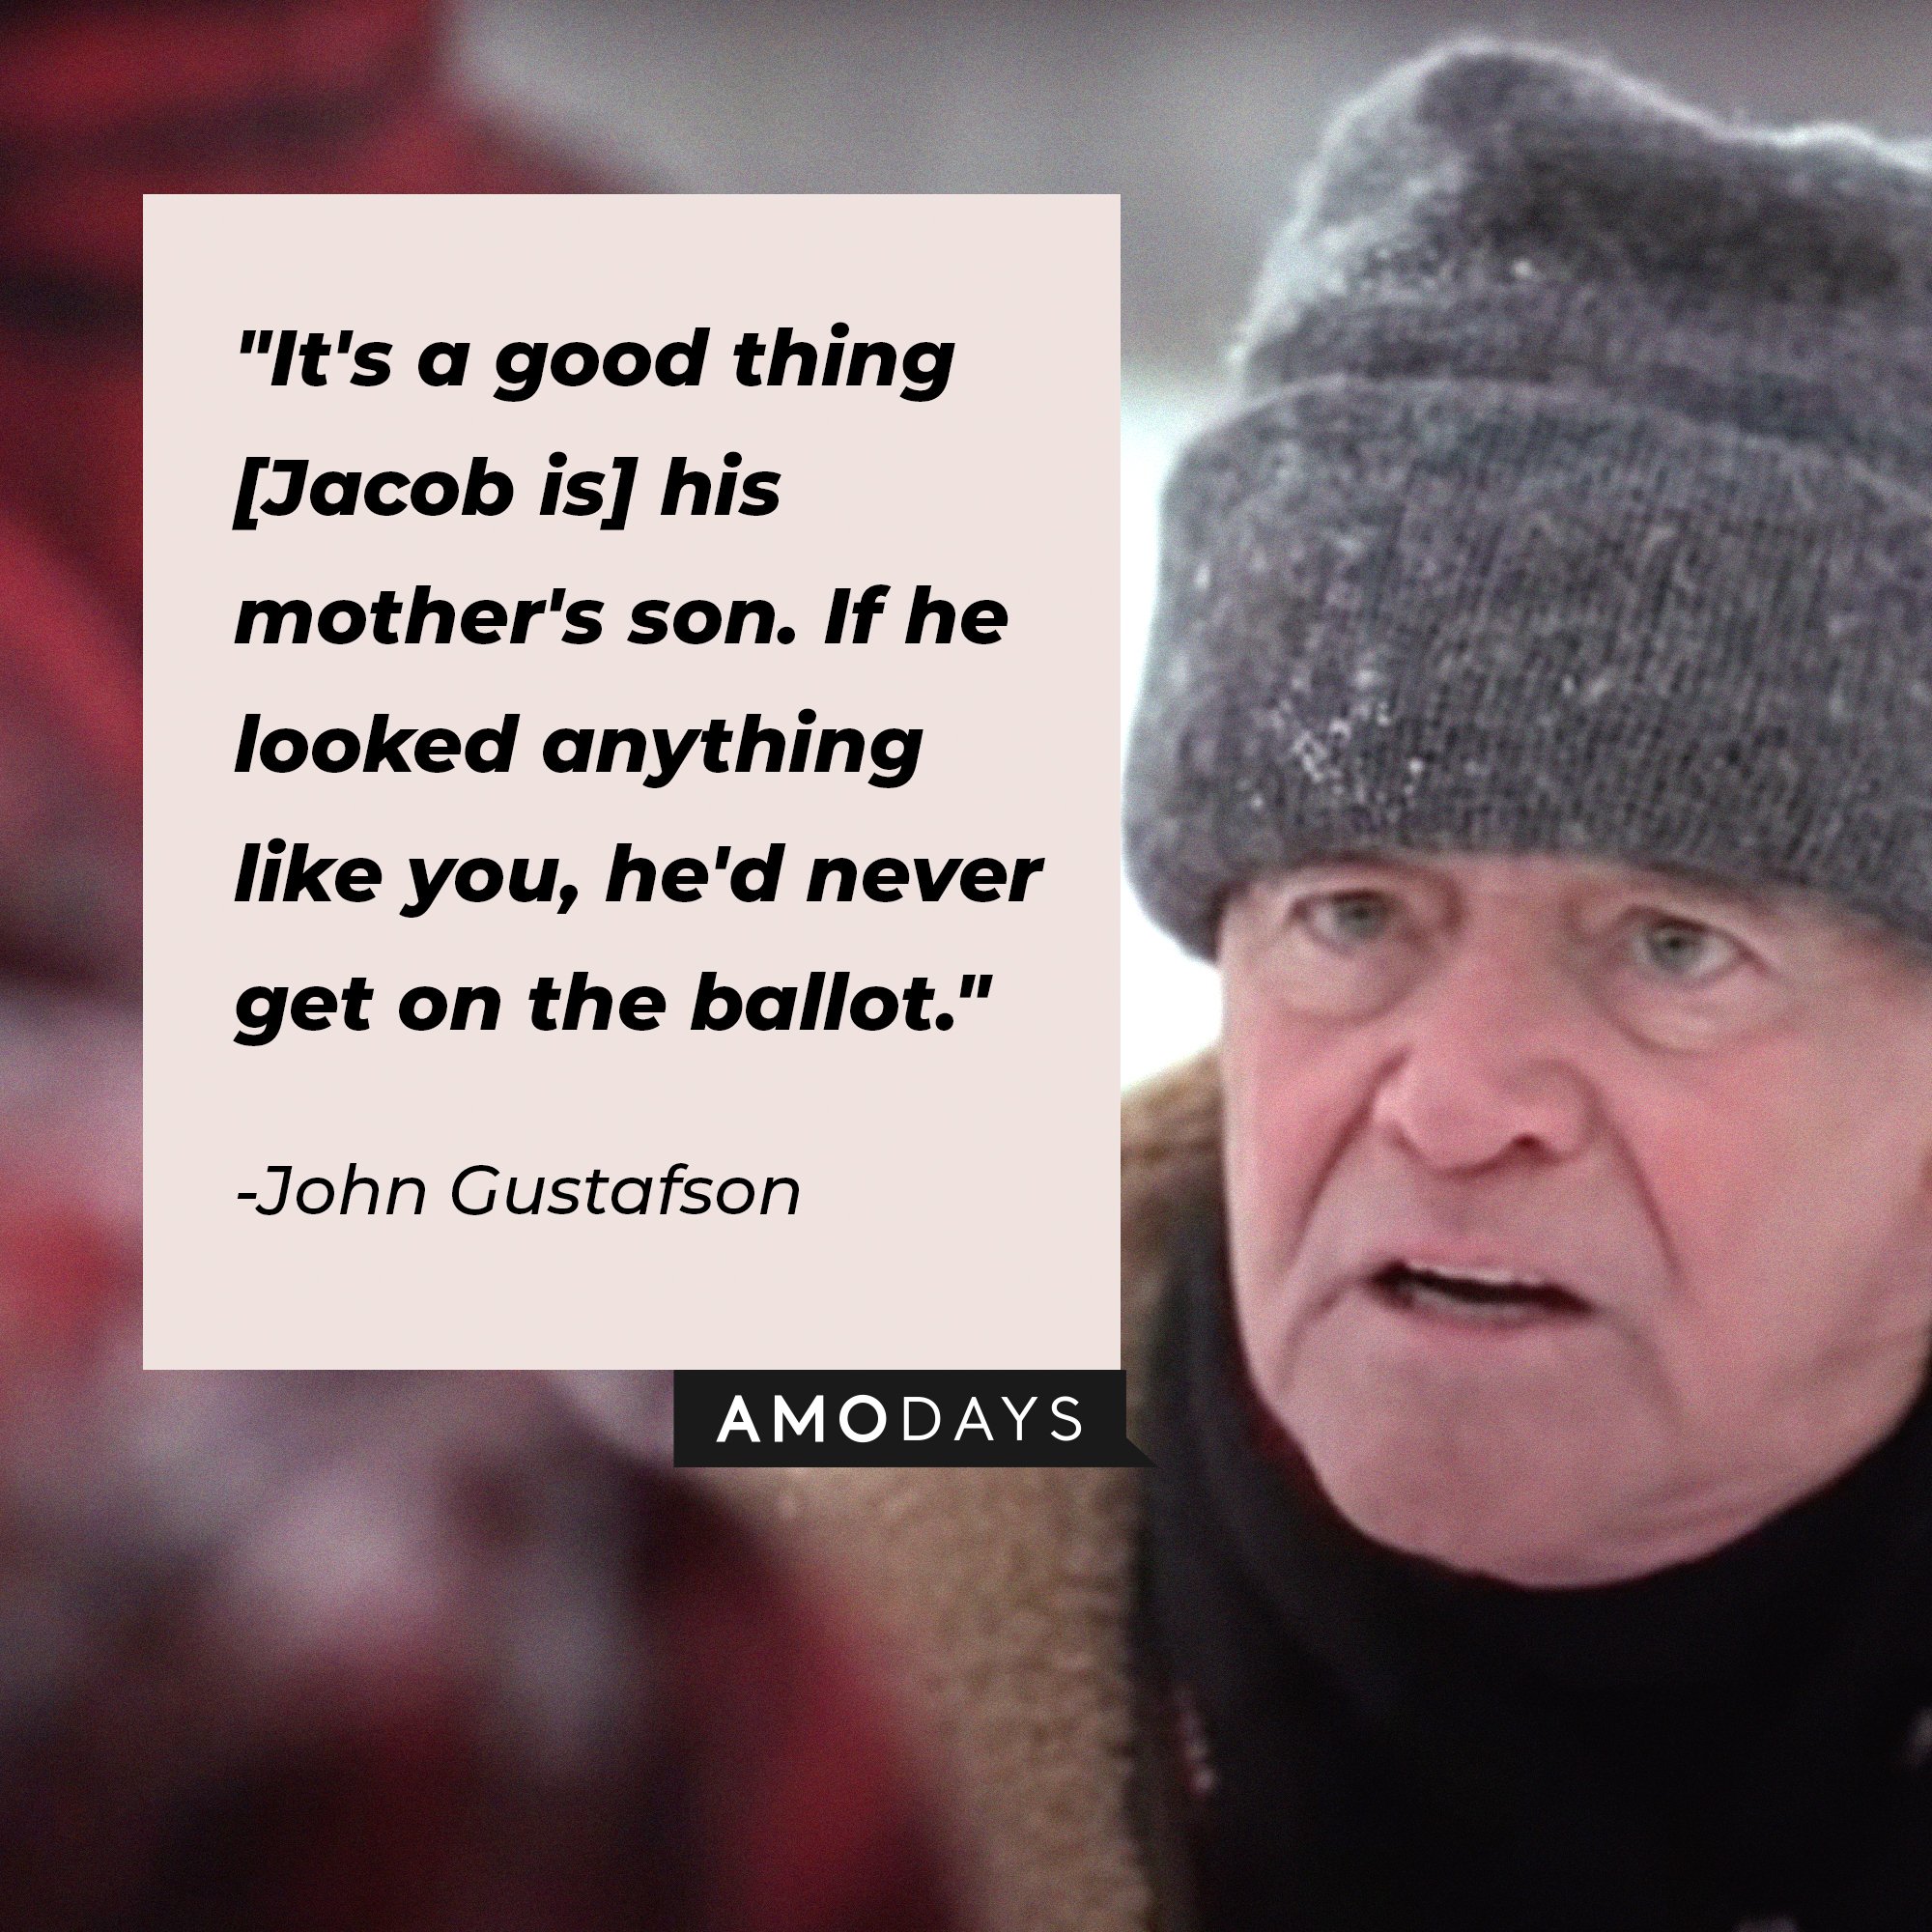  John Gustafson’s quote: "It's a good thing [Jacob is] his mother's son. If he looked anything like you, he'd never get on the ballot." | Image: AmoDays